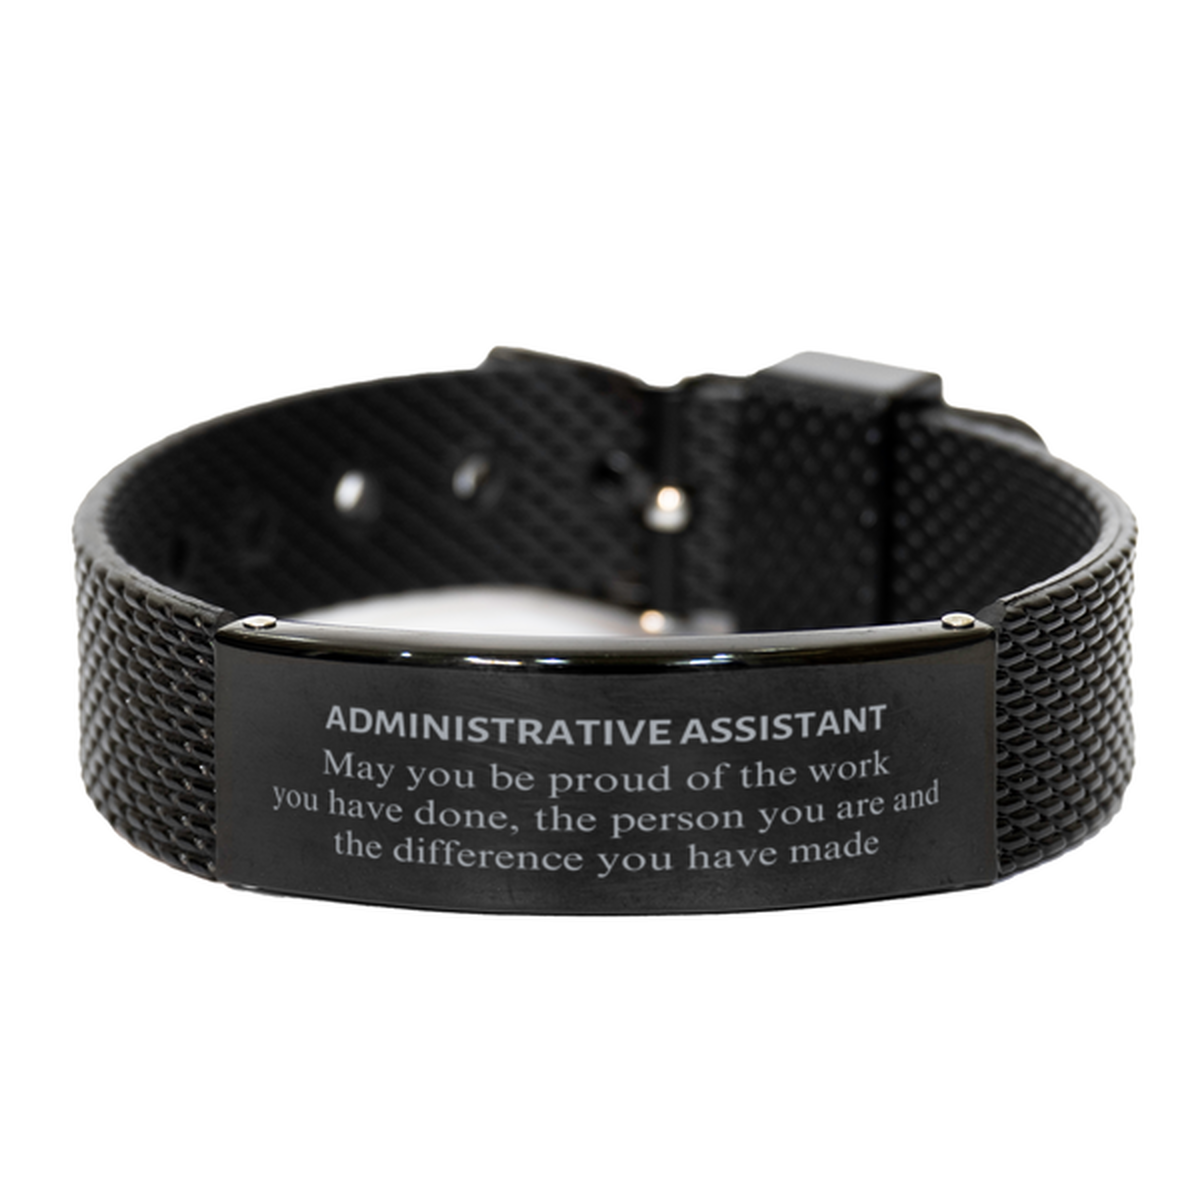 Administrative Assistant May you be proud of the work you have done, Retirement Administrative Assistant Black Shark Mesh Bracelet for Colleague Appreciation Gifts Amazing for Administrative Assistant